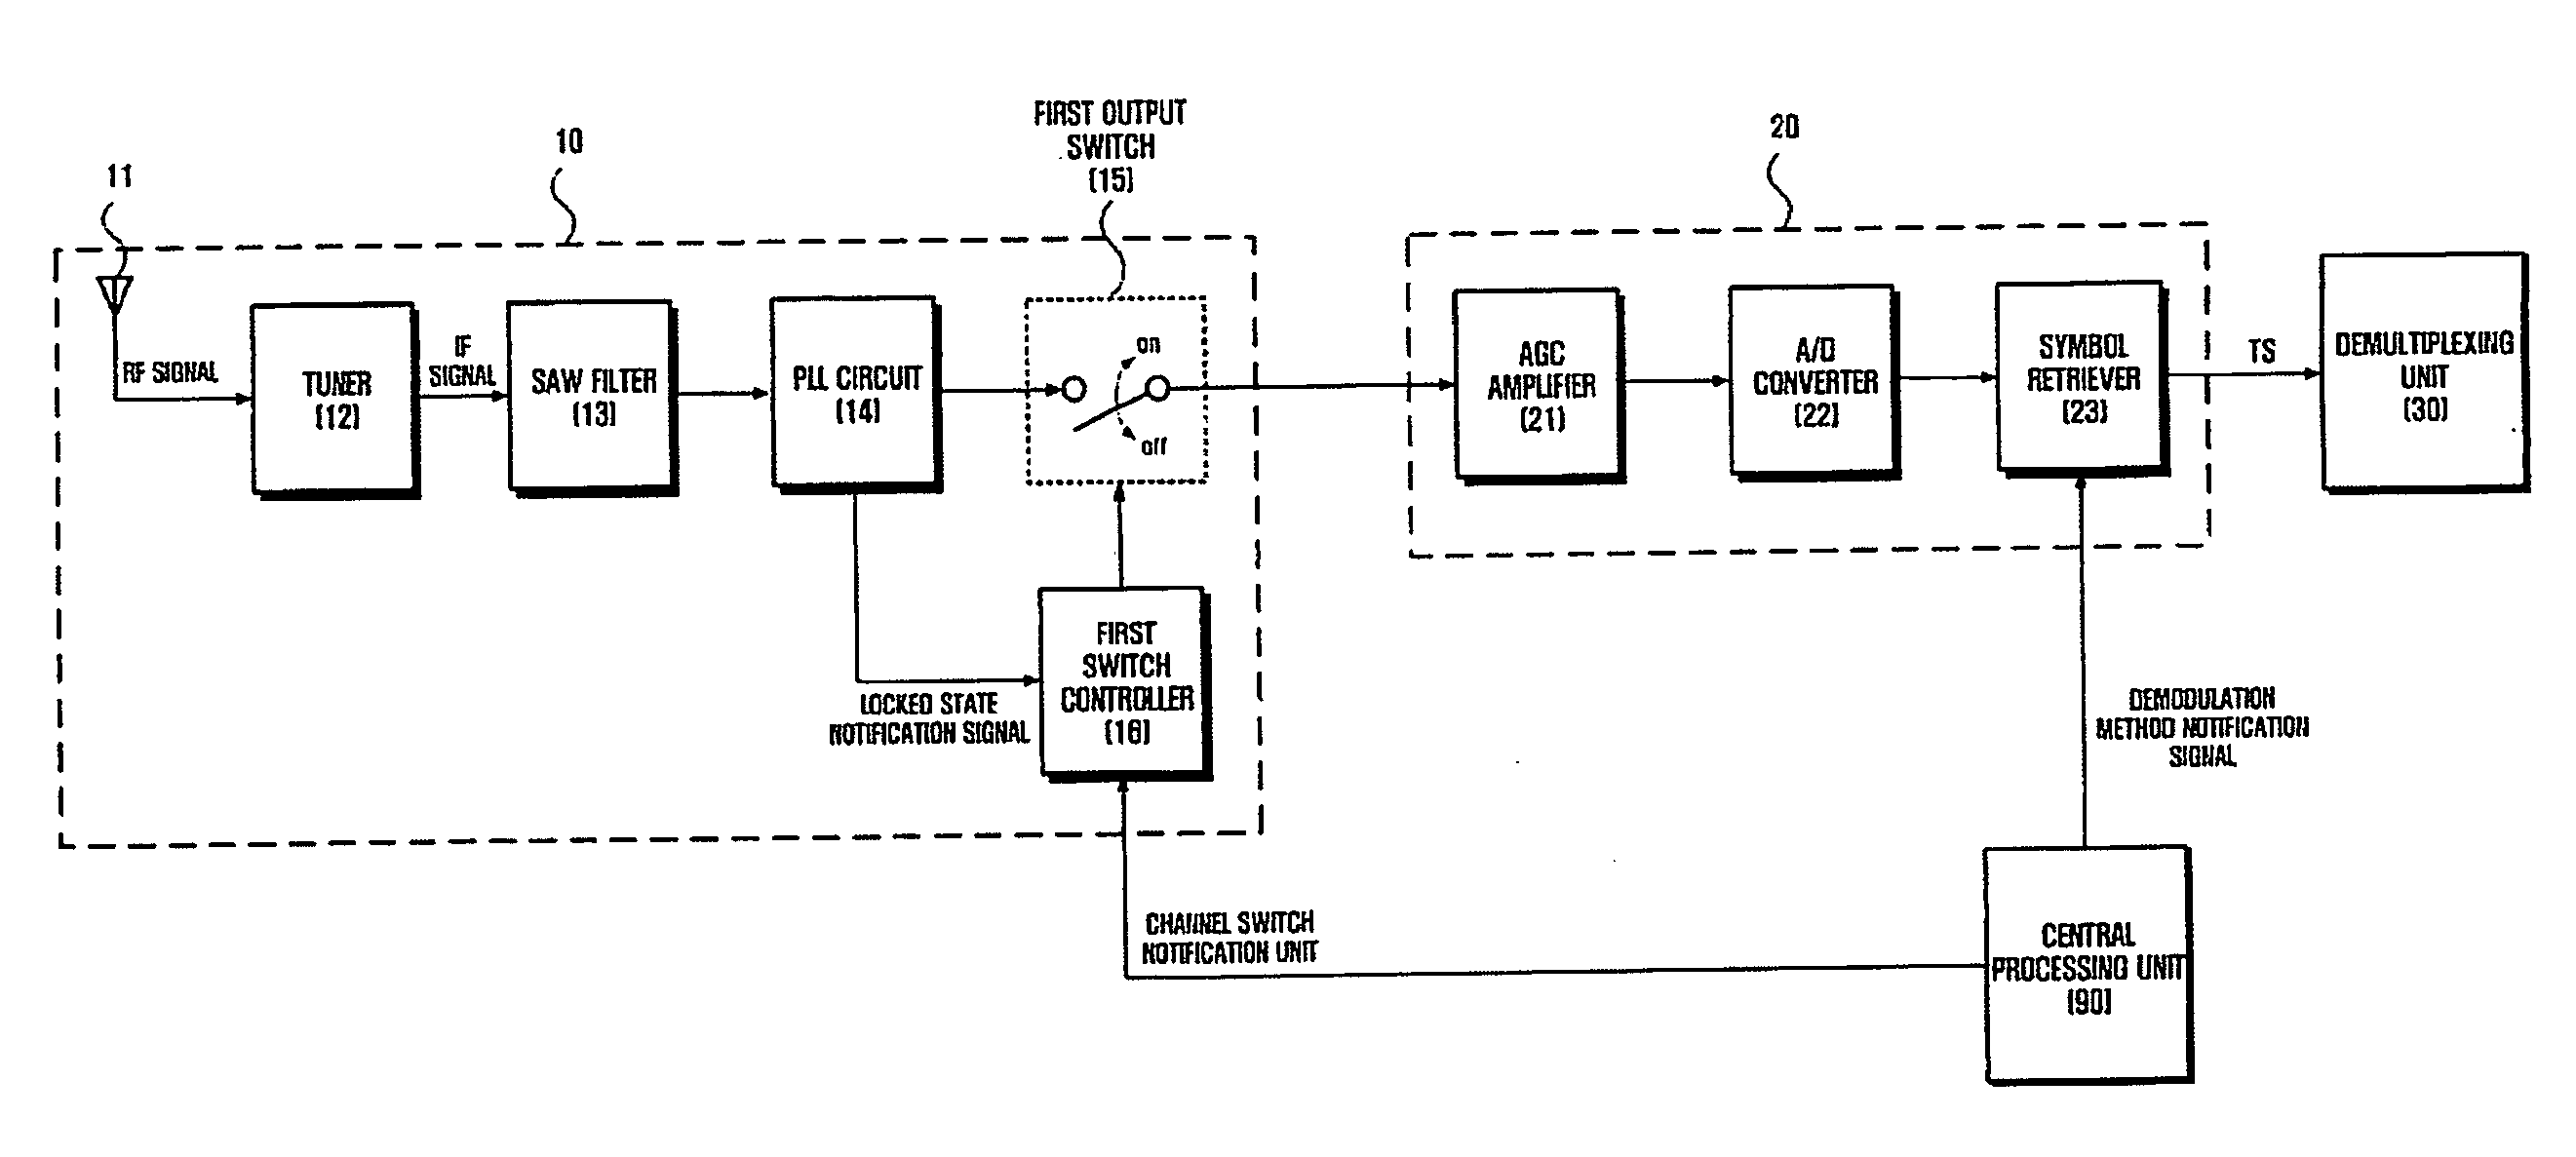 Method for reducing channel switching delay in digital broadcast receiver and digital broadcast receiver using the same